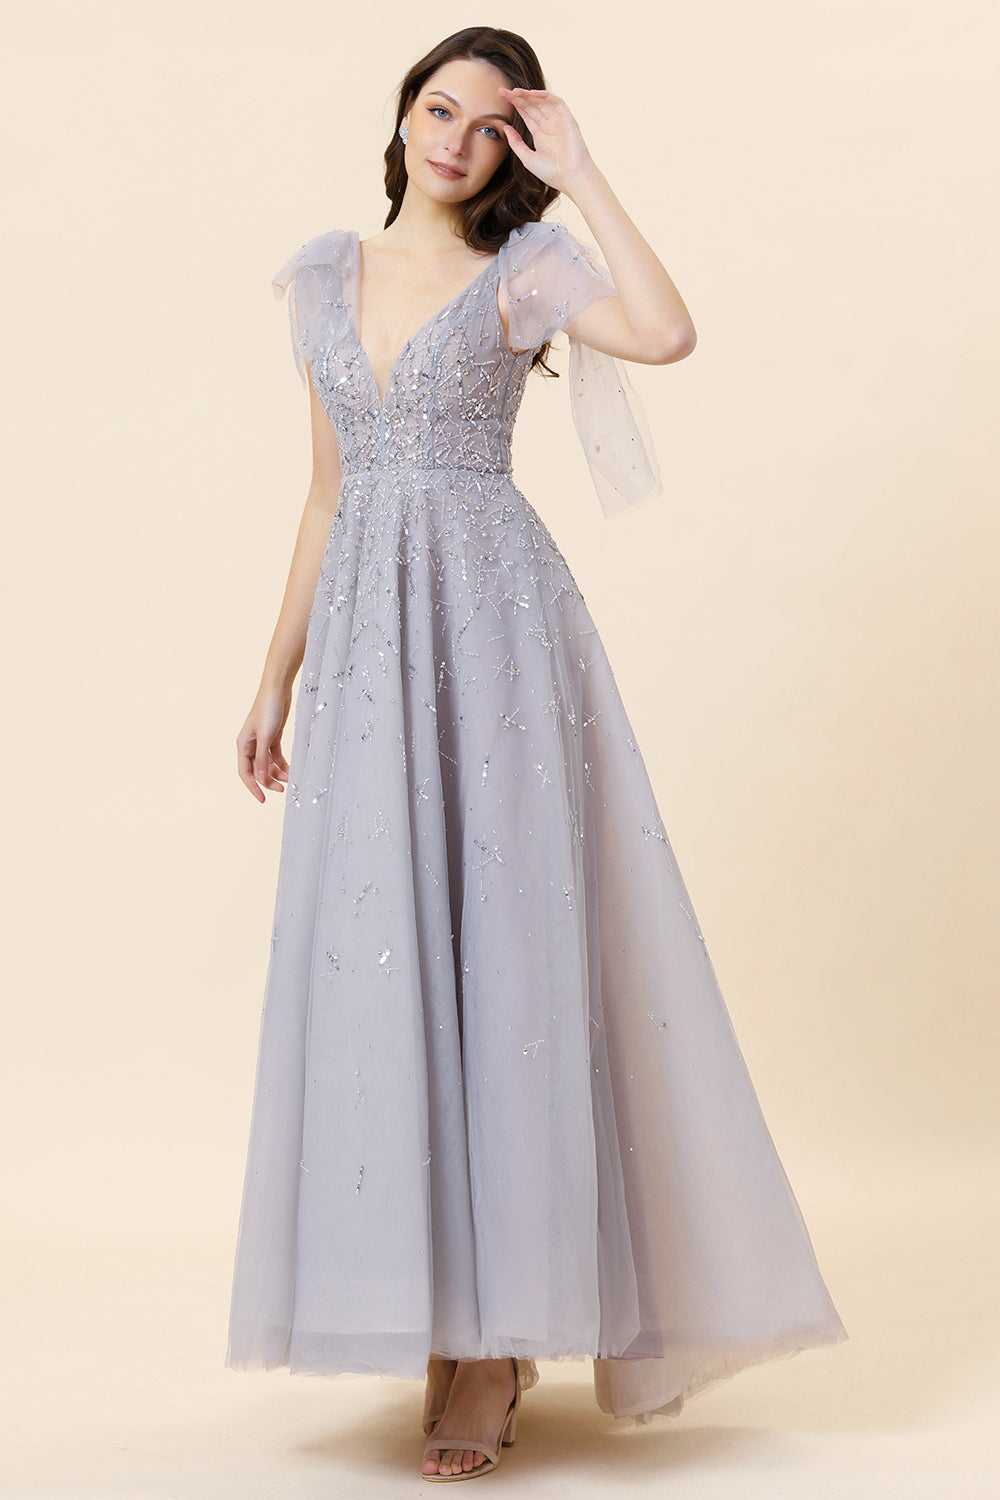 Sparkly Beaded Grey Long Tulle Prom Dress